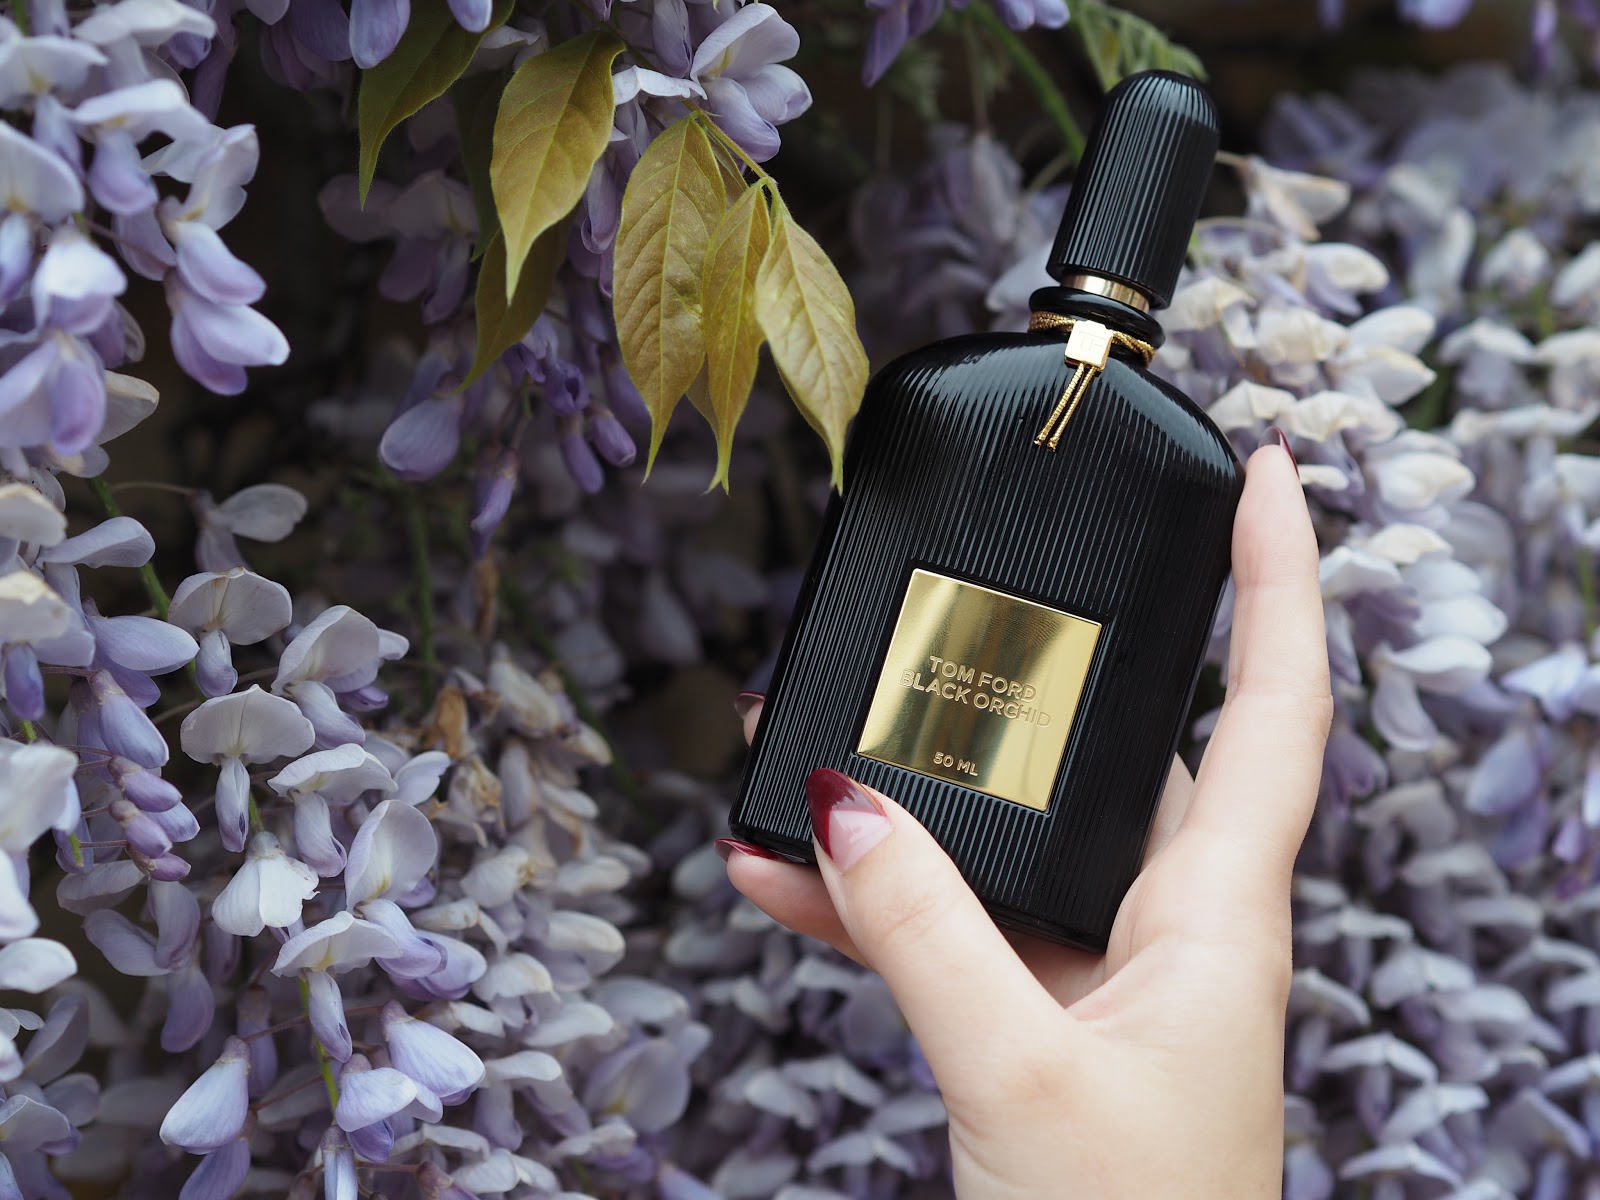 Tom ford orchid мужские. Tom Ford Black Orchid 30ml. Tom Ford Perfume Black Orchid. Tom Ford Signature. Tom Ford Black Orchid мужской.